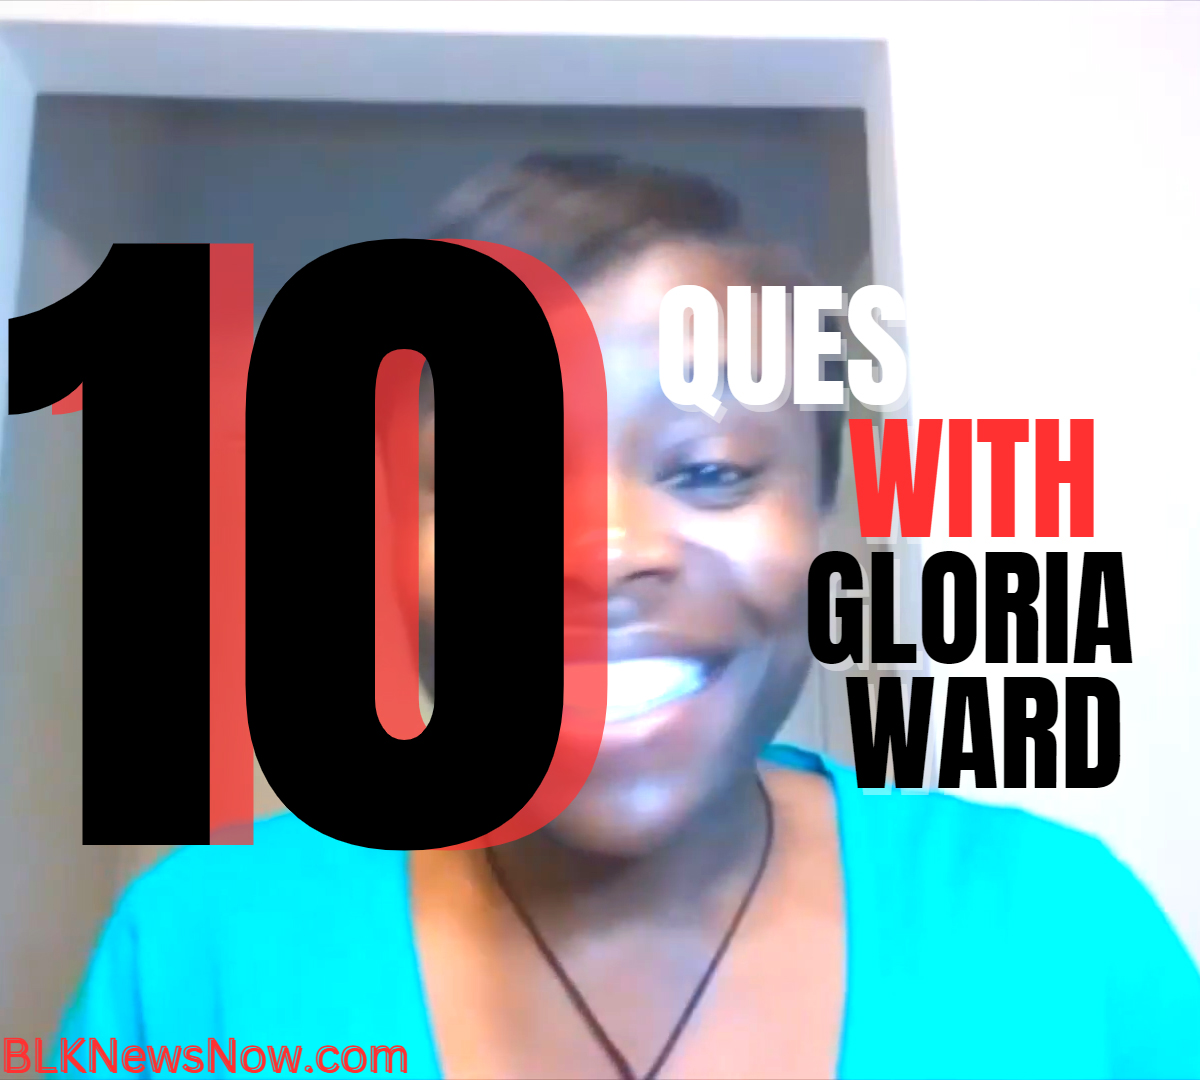 Gloria Ward discusses empowering Black women, reveals upcoming TED Talk